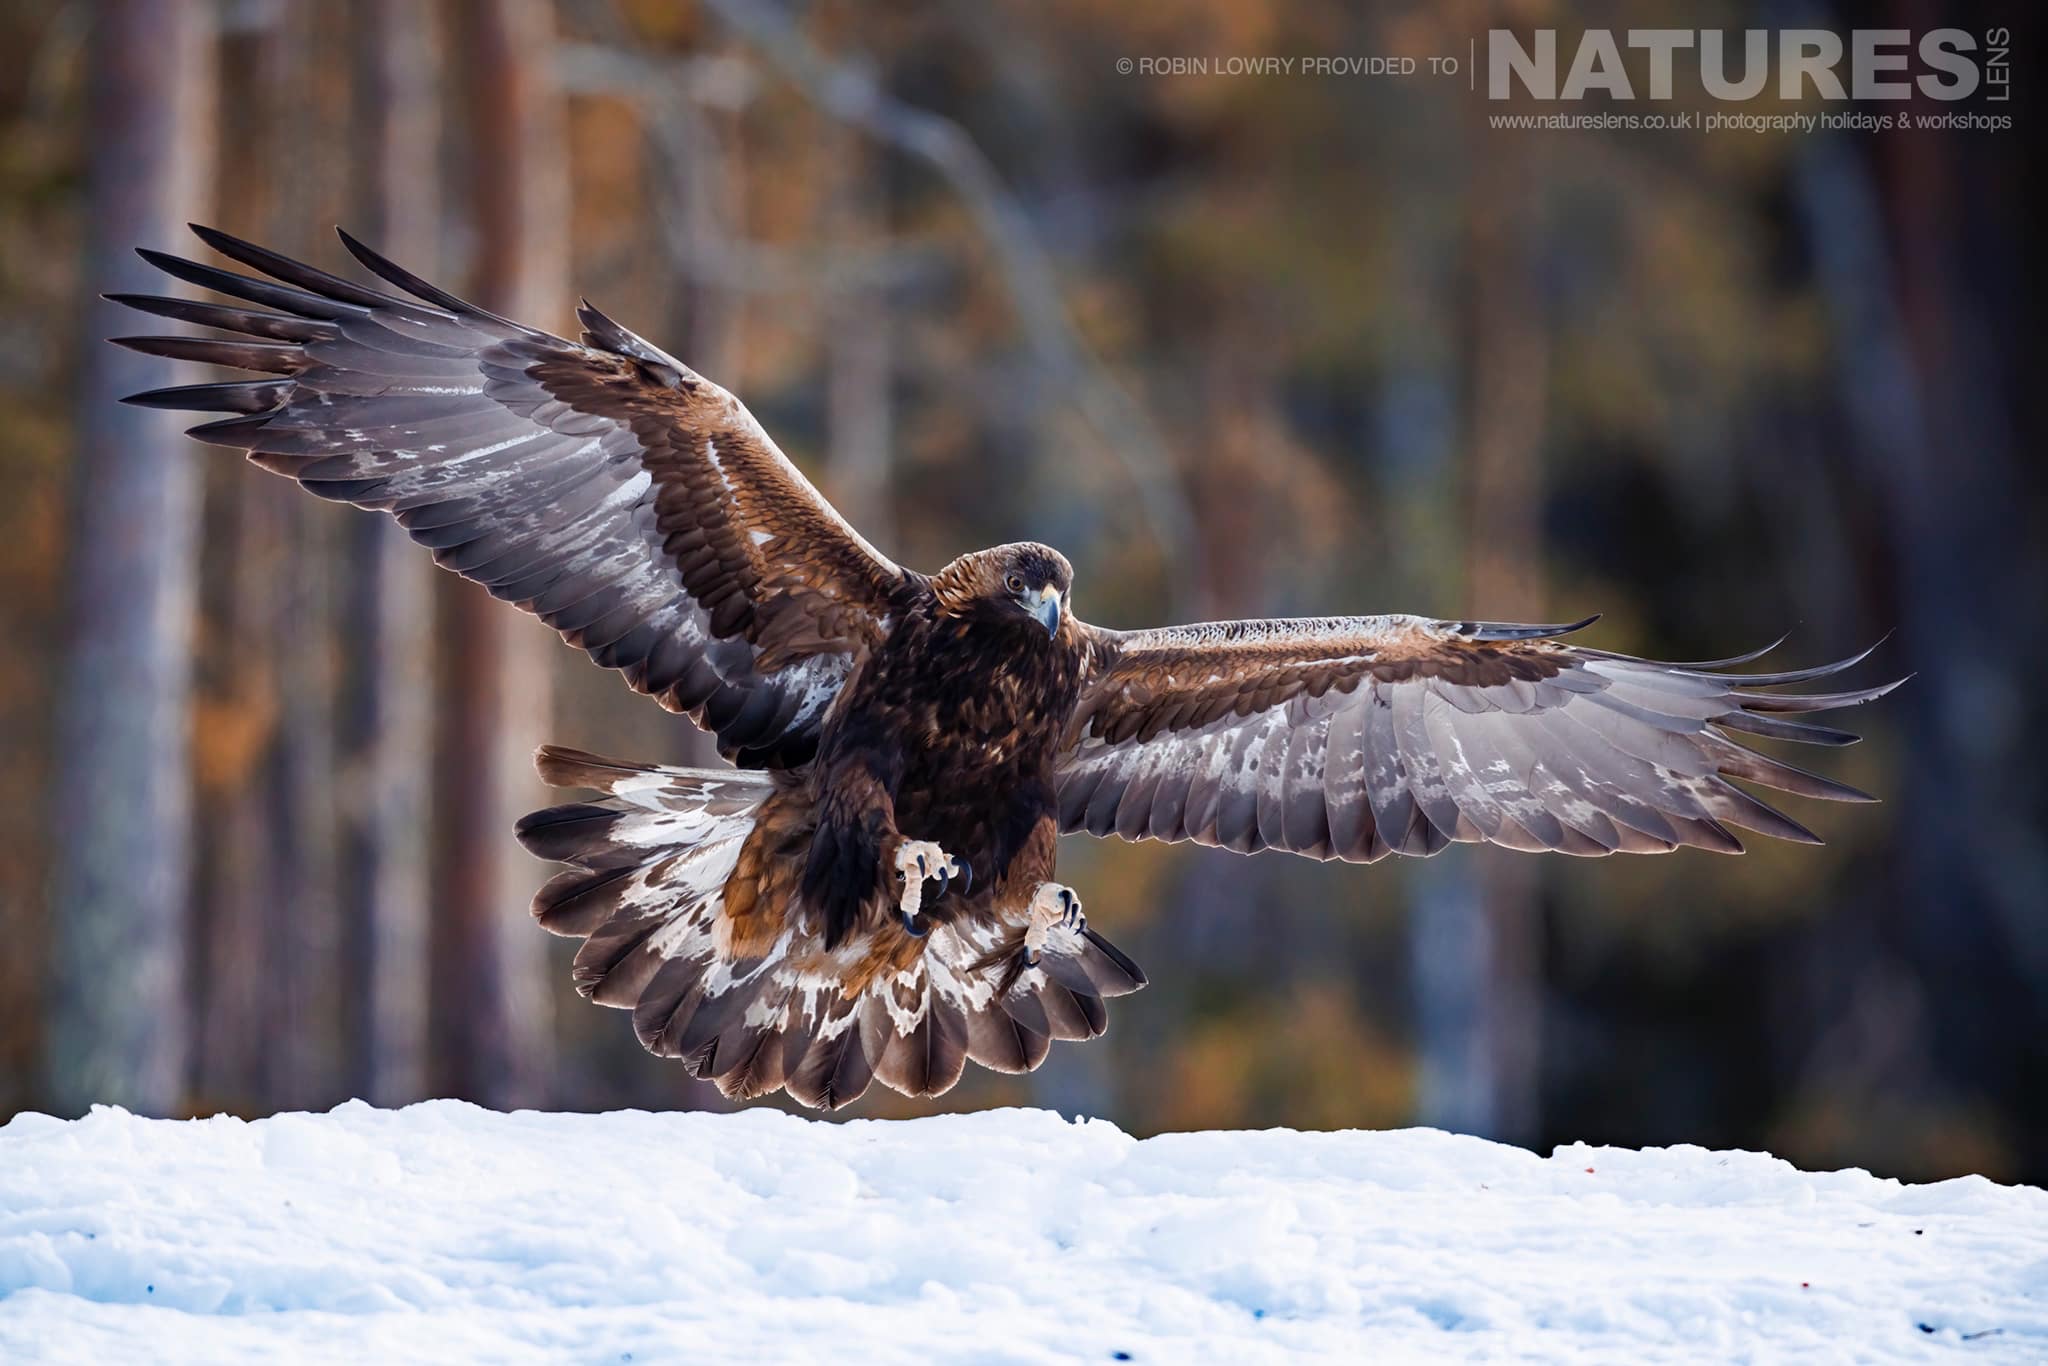 One Of The Resident Golden Eagles Flying Over The Snow Covered Ground Photographed During A Natureslens Photography Holiday To Photograph Northern Sweden'S Eagles In Winter